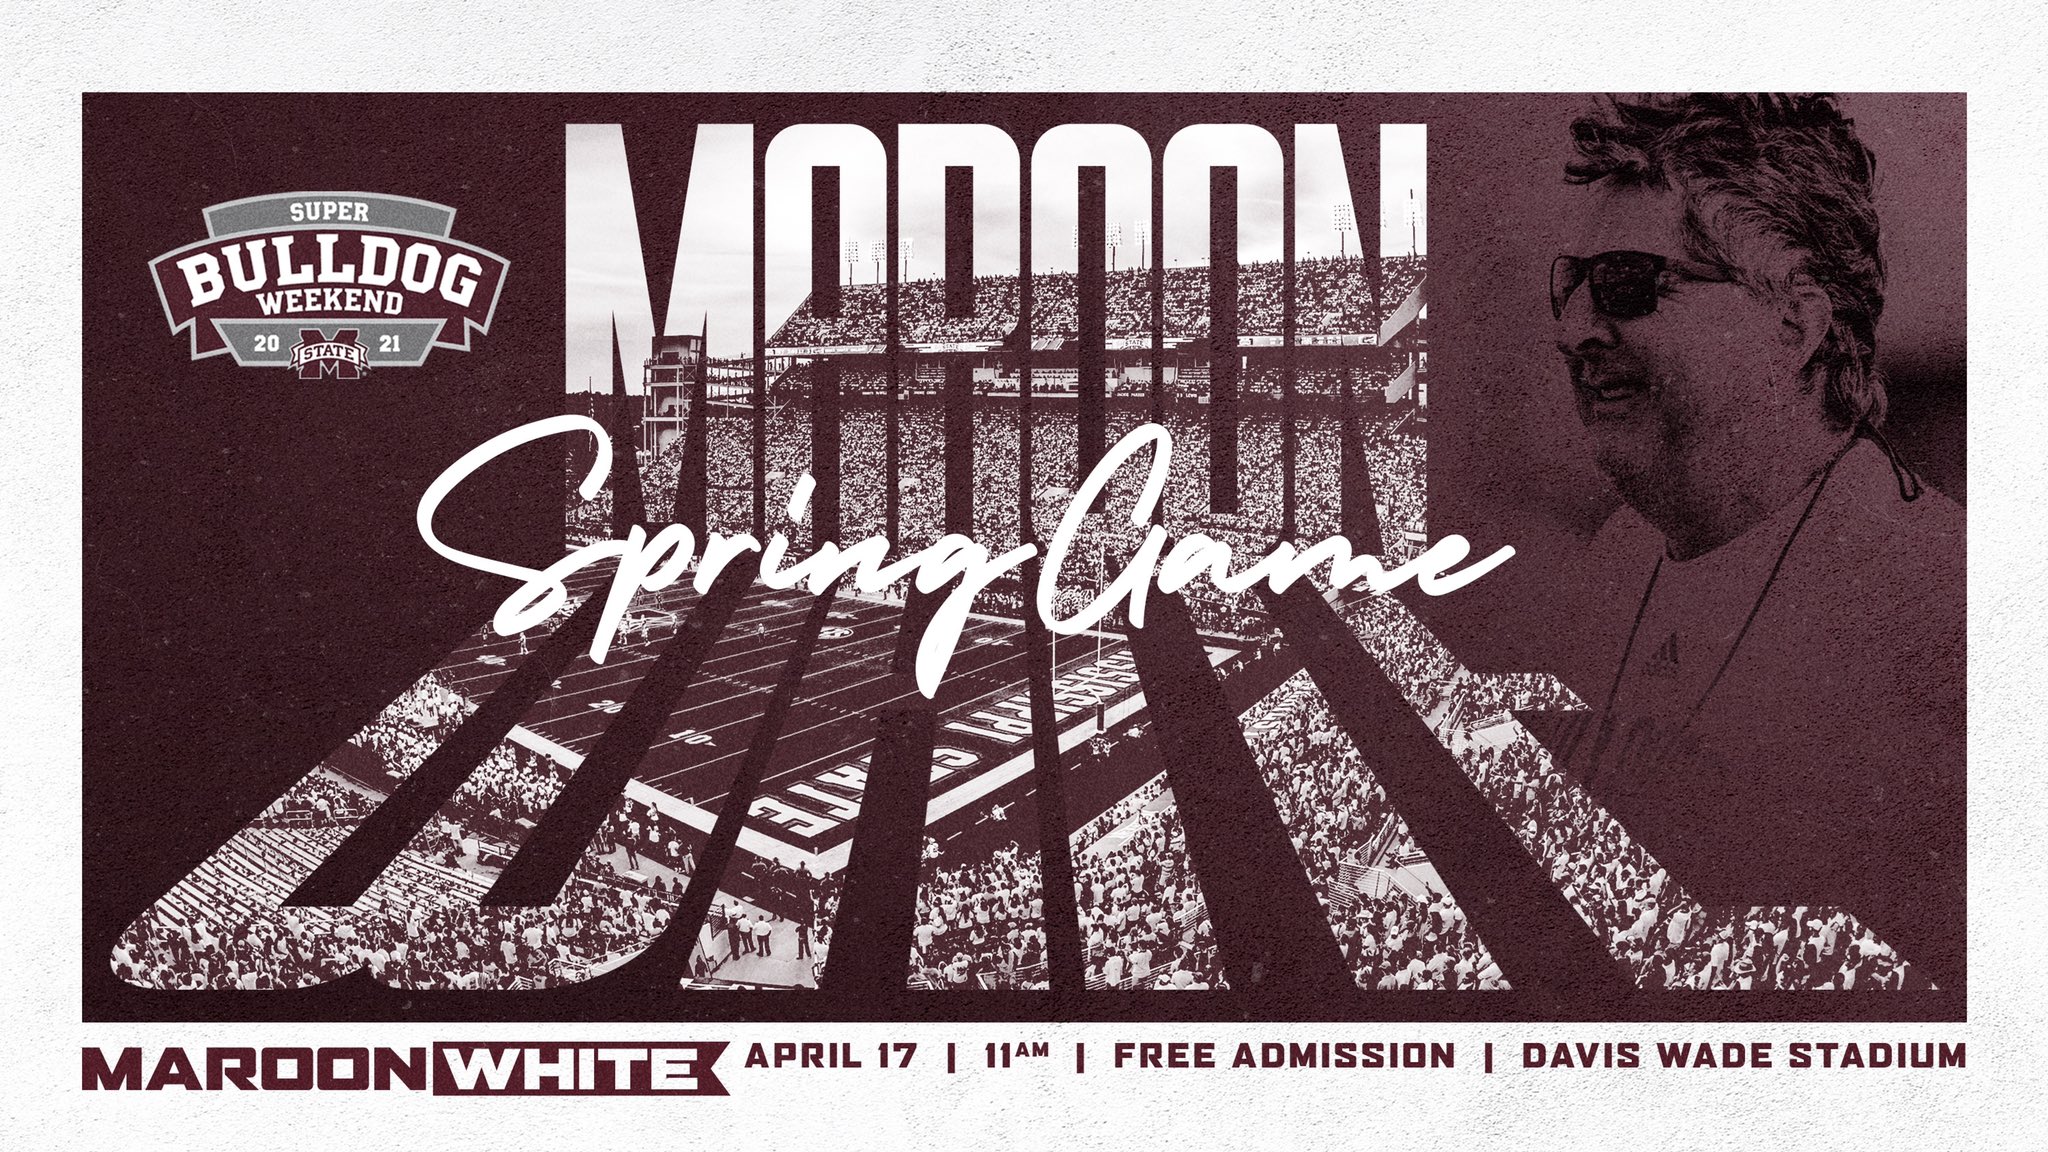 Maroon and White Spring Game graphic with images of Davis Wade Stadium, Coach Mike Leach and the Super Bulldog Weekend logo